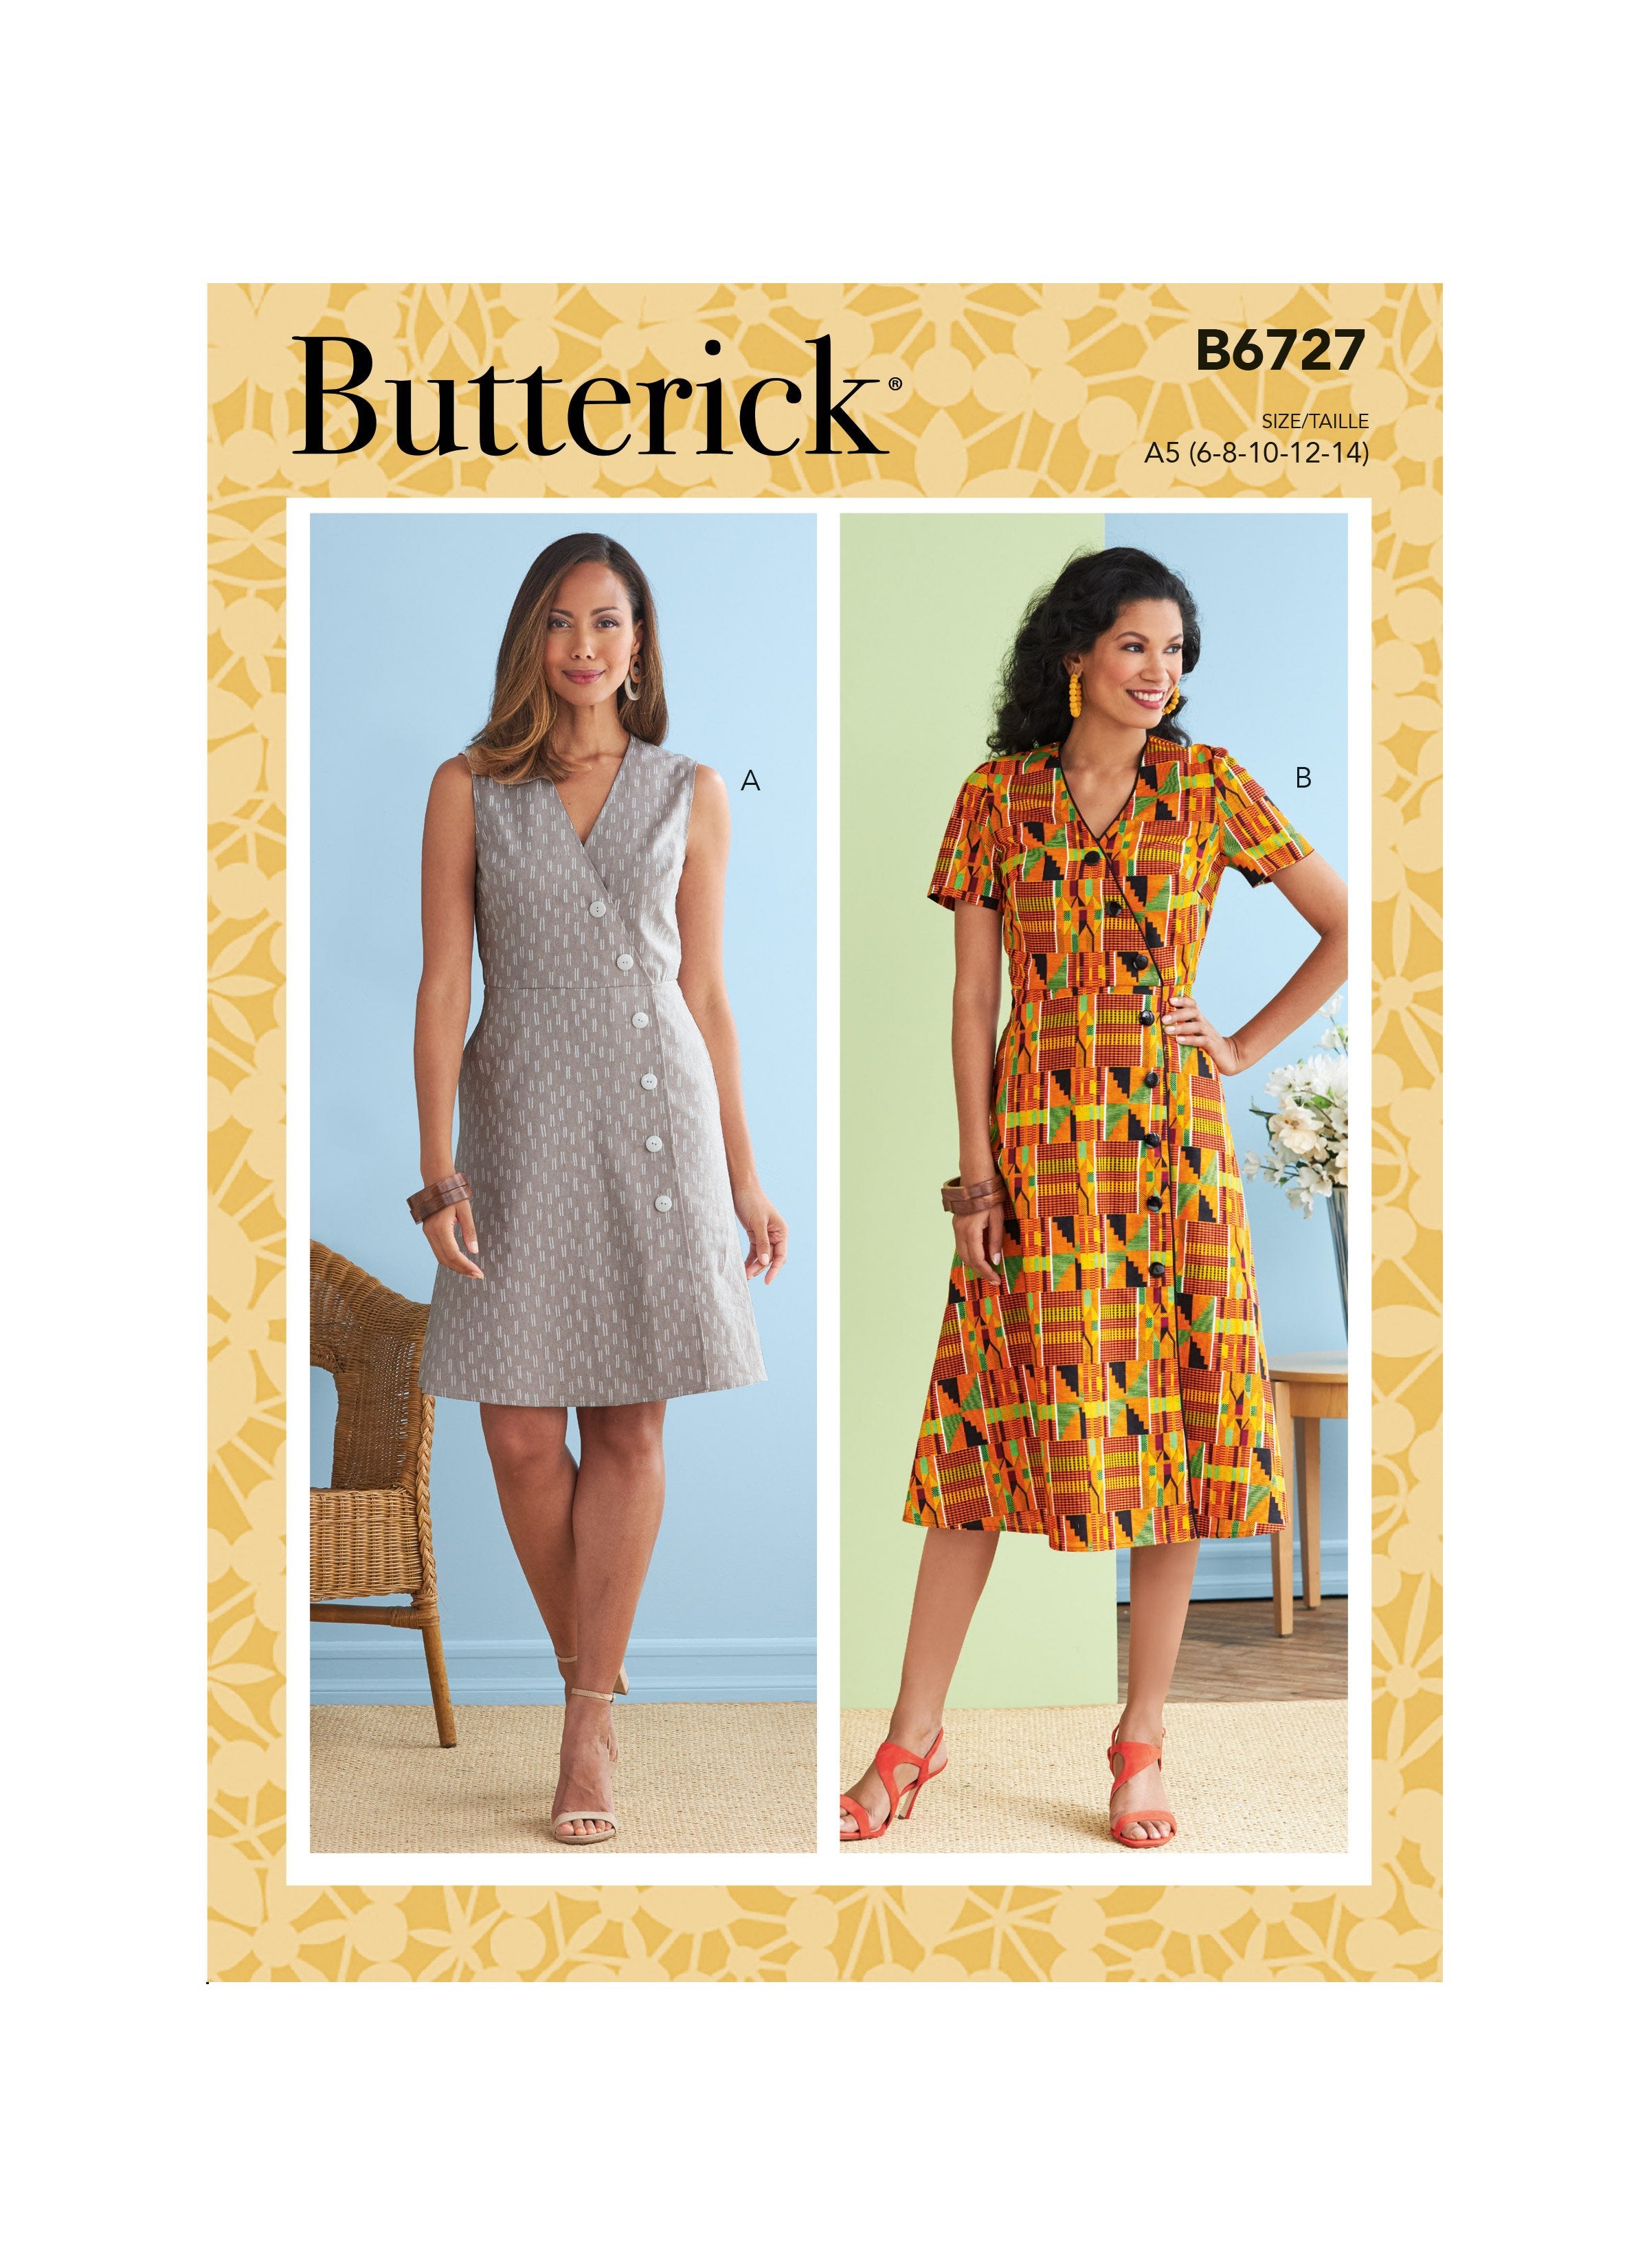 Butterick Sewing Pattern 6727 Misses' Dresses from Jaycotts Sewing Supplies